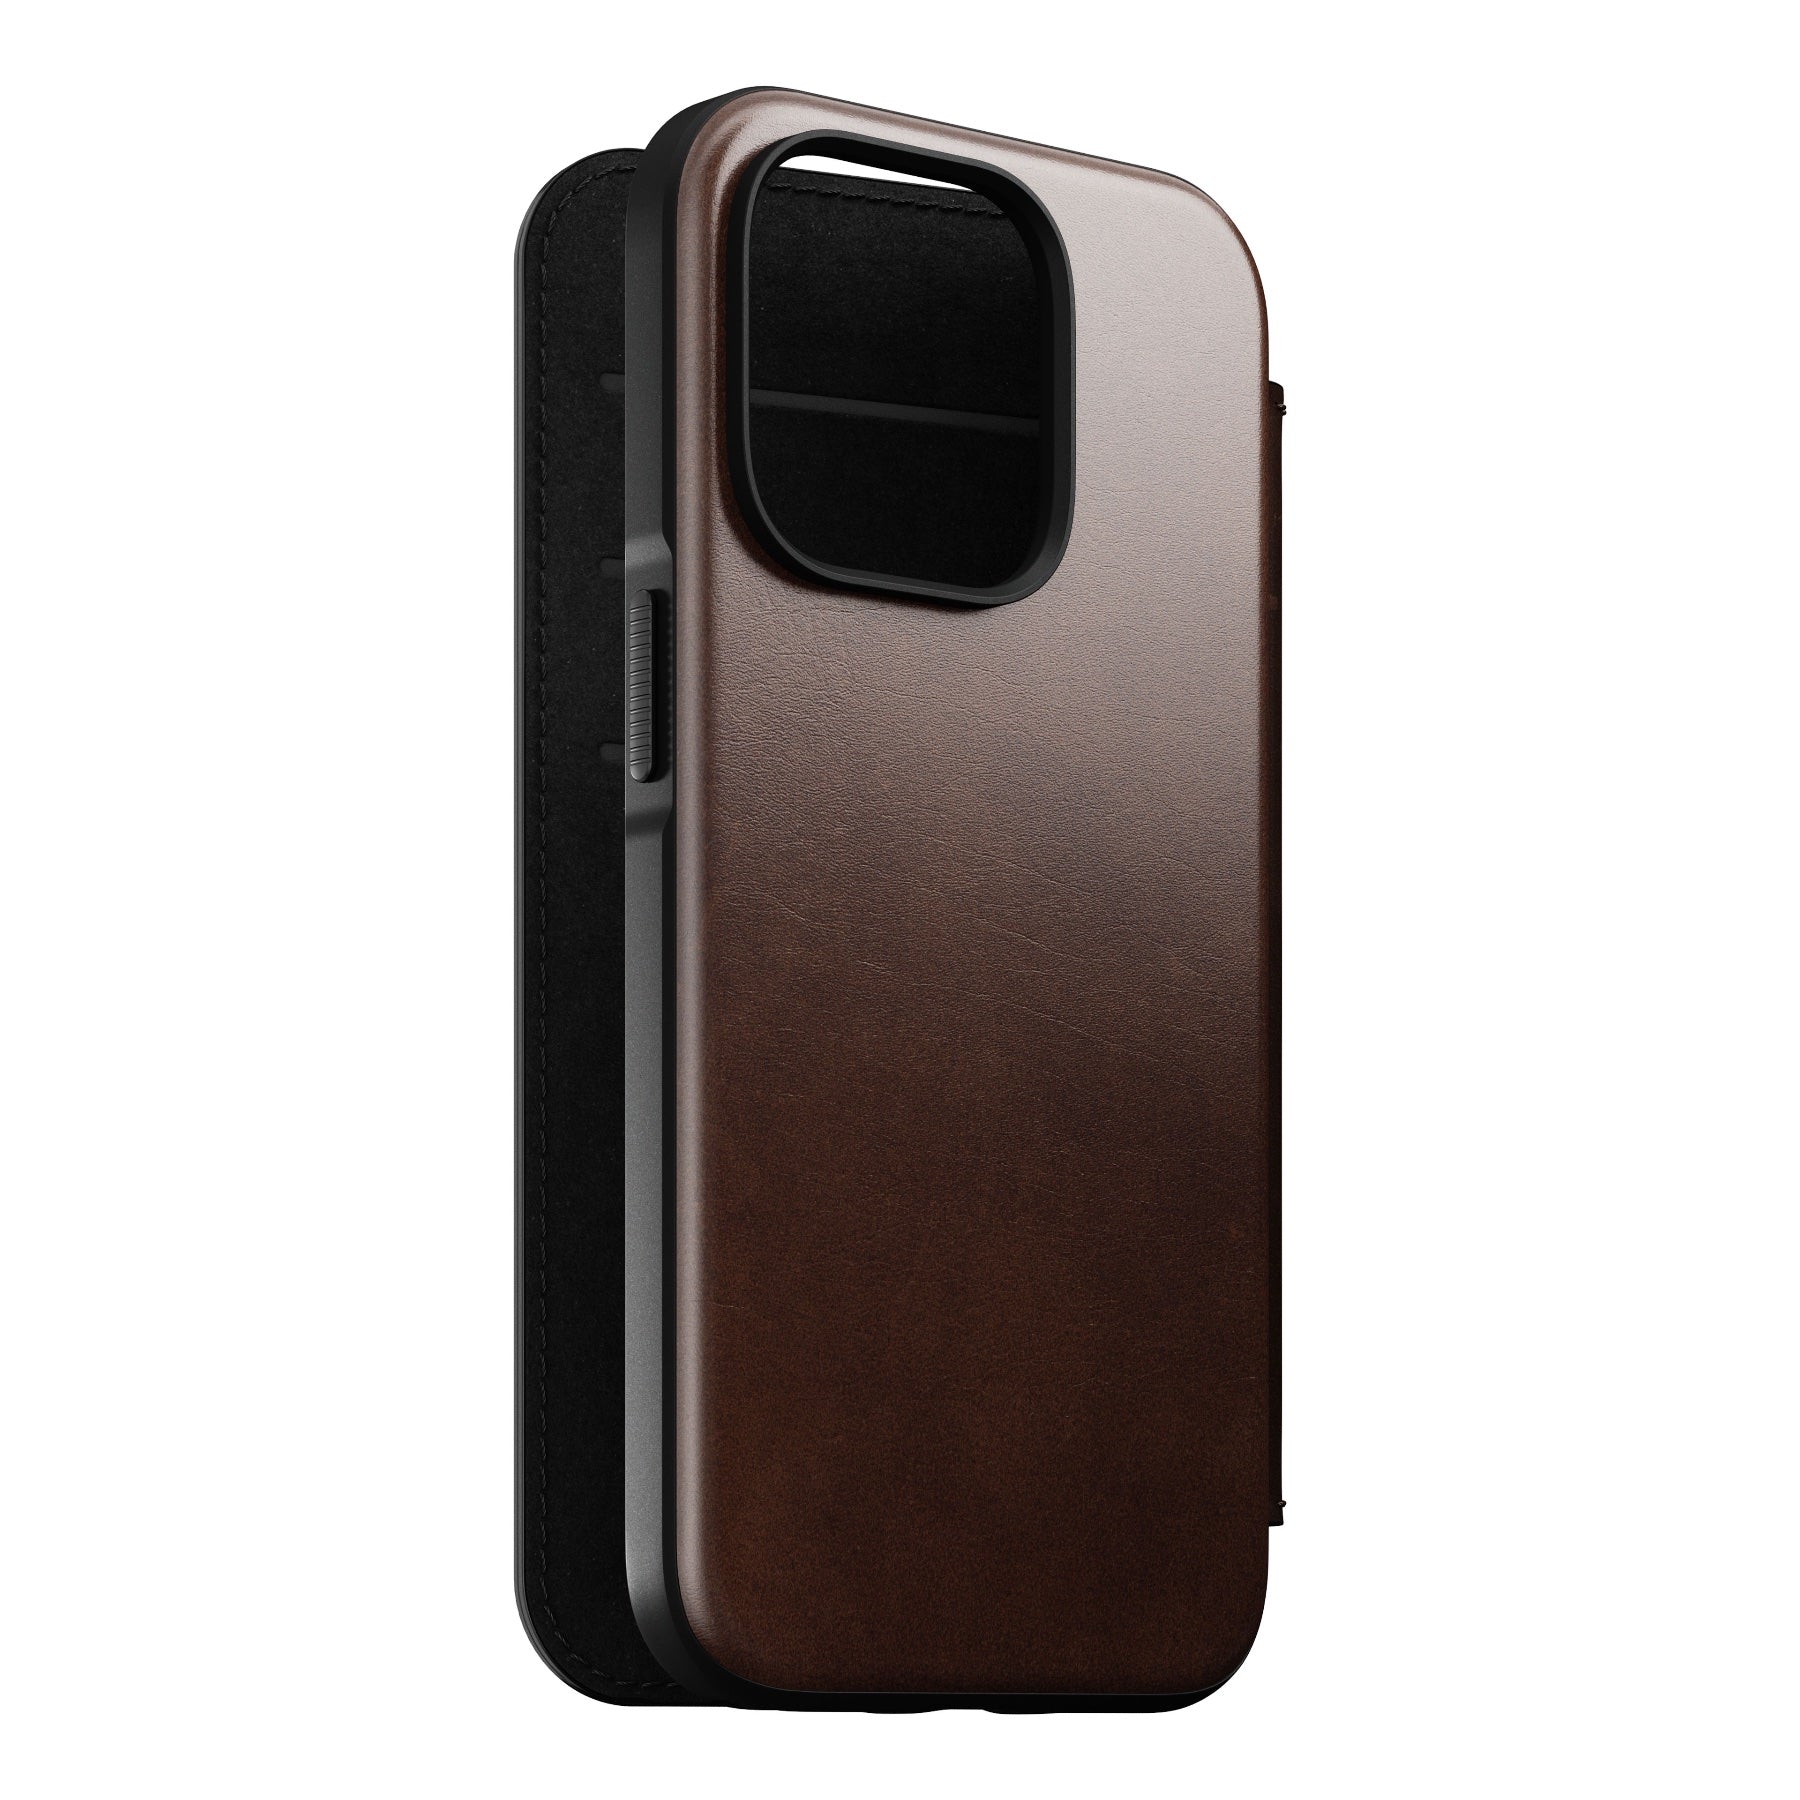 Nomad Modern Horween Leather Folio for iPhone 14 Series - The Usual